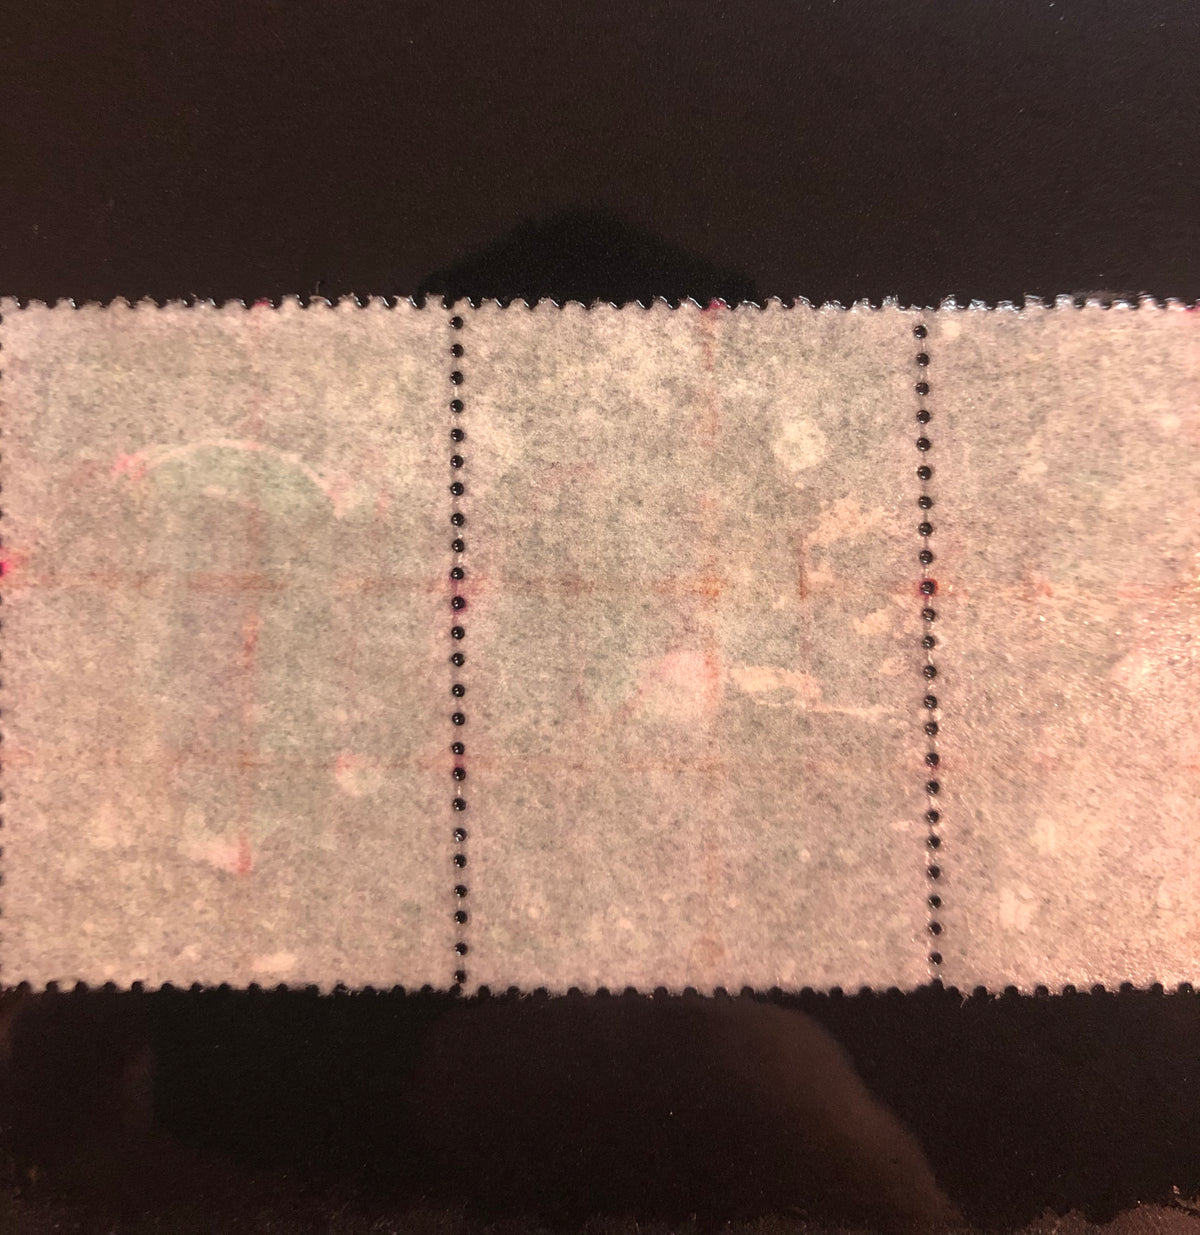 0112ML2012 - ML112 - Used Strip of 5, UNLISTED STITCH WATERMARK